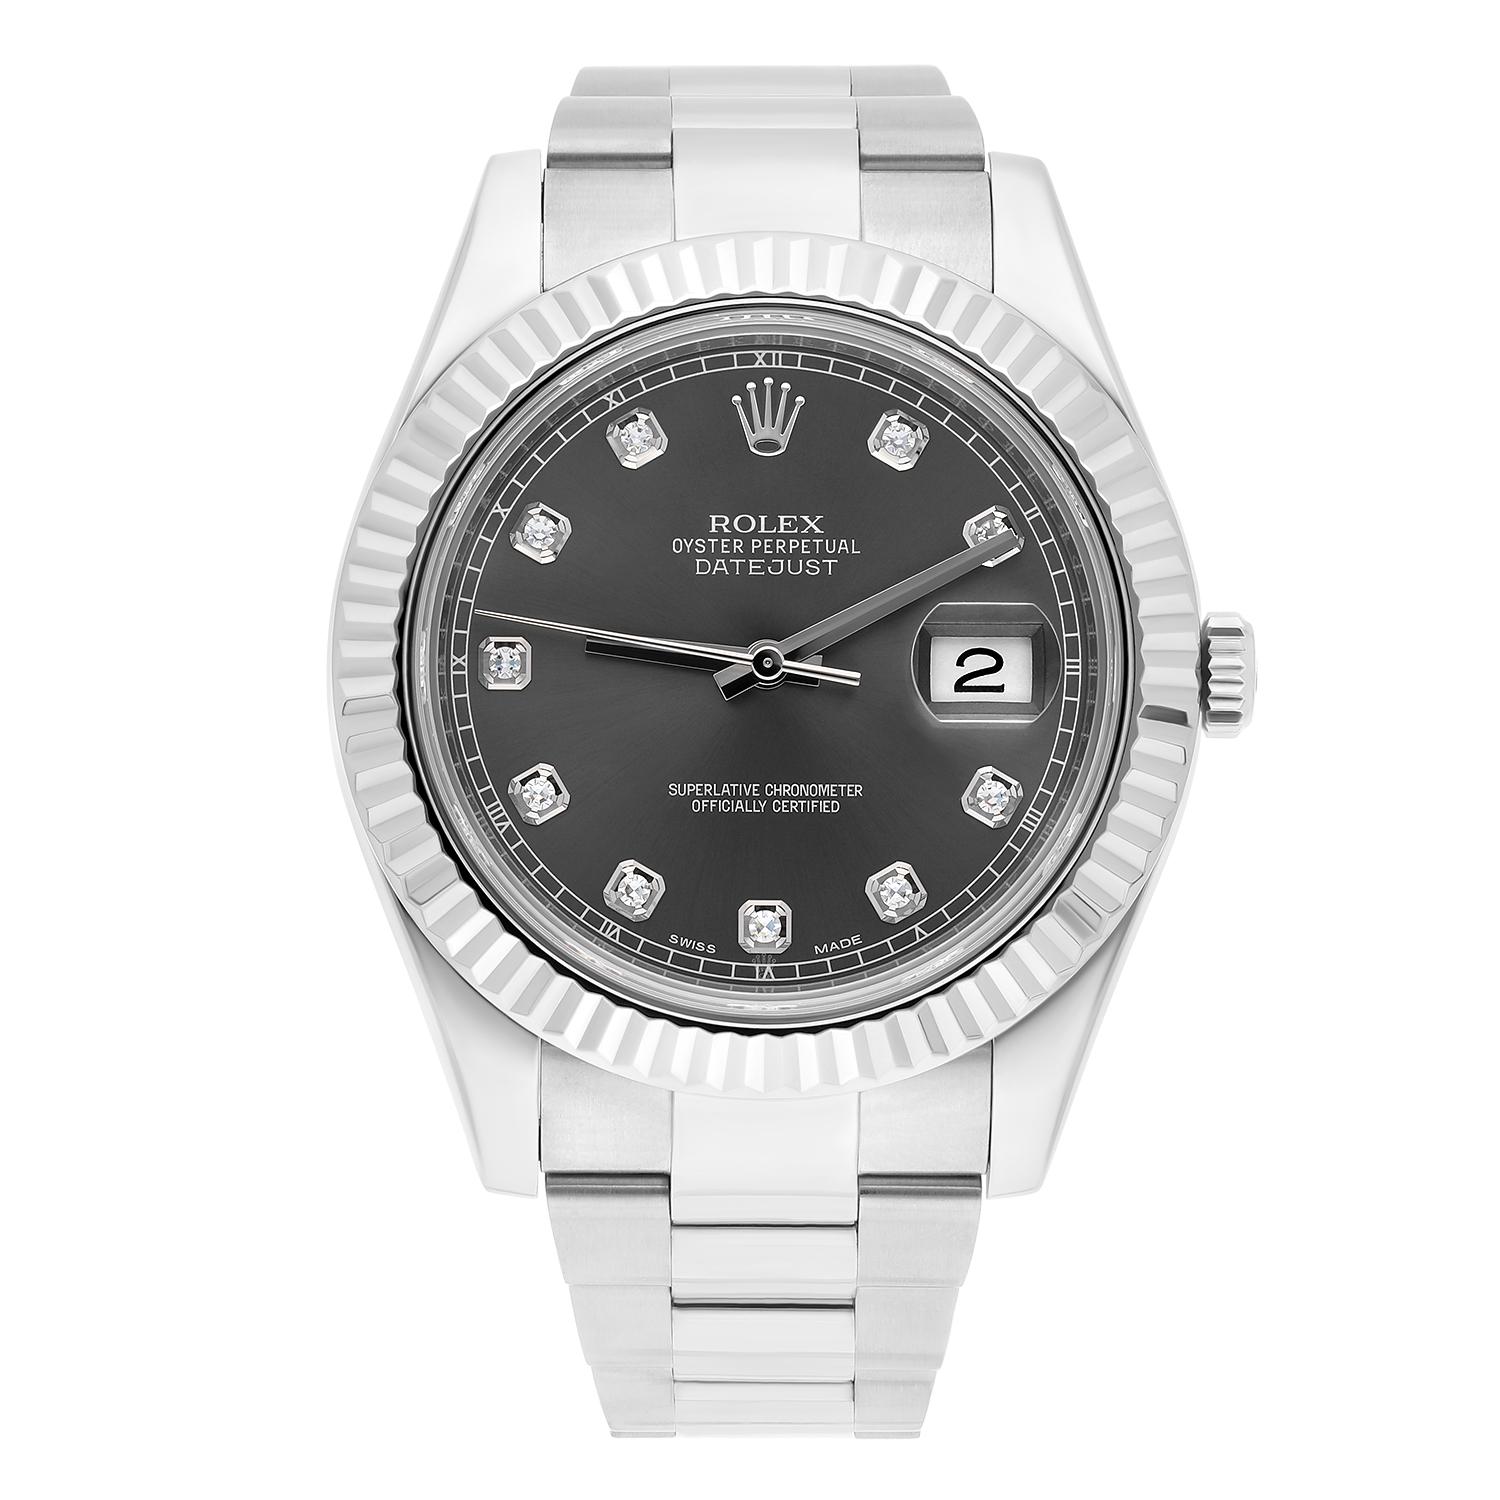 This watch has been professionally polished, serviced and does not have any visible scratches or blemishes.
It can easily pass as unworn.
Sale comes with a Rolex box, appraisal certificate validating authenticity of the watch and our in-house 1 year